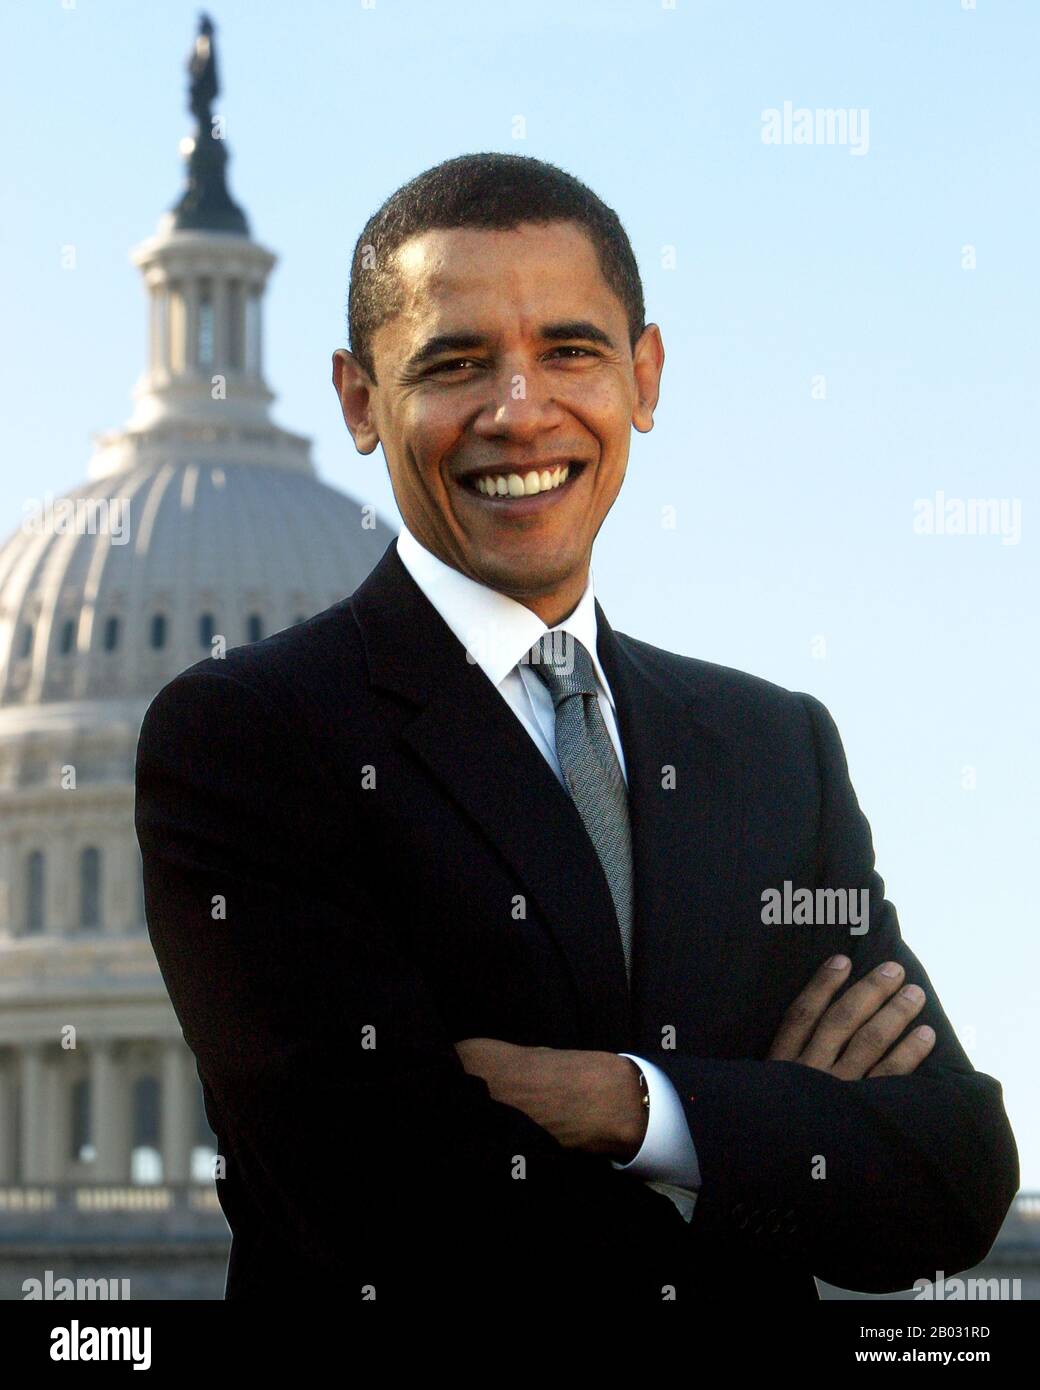 Barack Hussein Obama II (born August 4, 1961) is the 44th and current President of the United States, as well as the first African American to hold the office.  Born in Honolulu, Hawaii, Obama is a graduate of Columbia University and Harvard Law School, where he served as president of the Harvard Law Review. Stock Photo